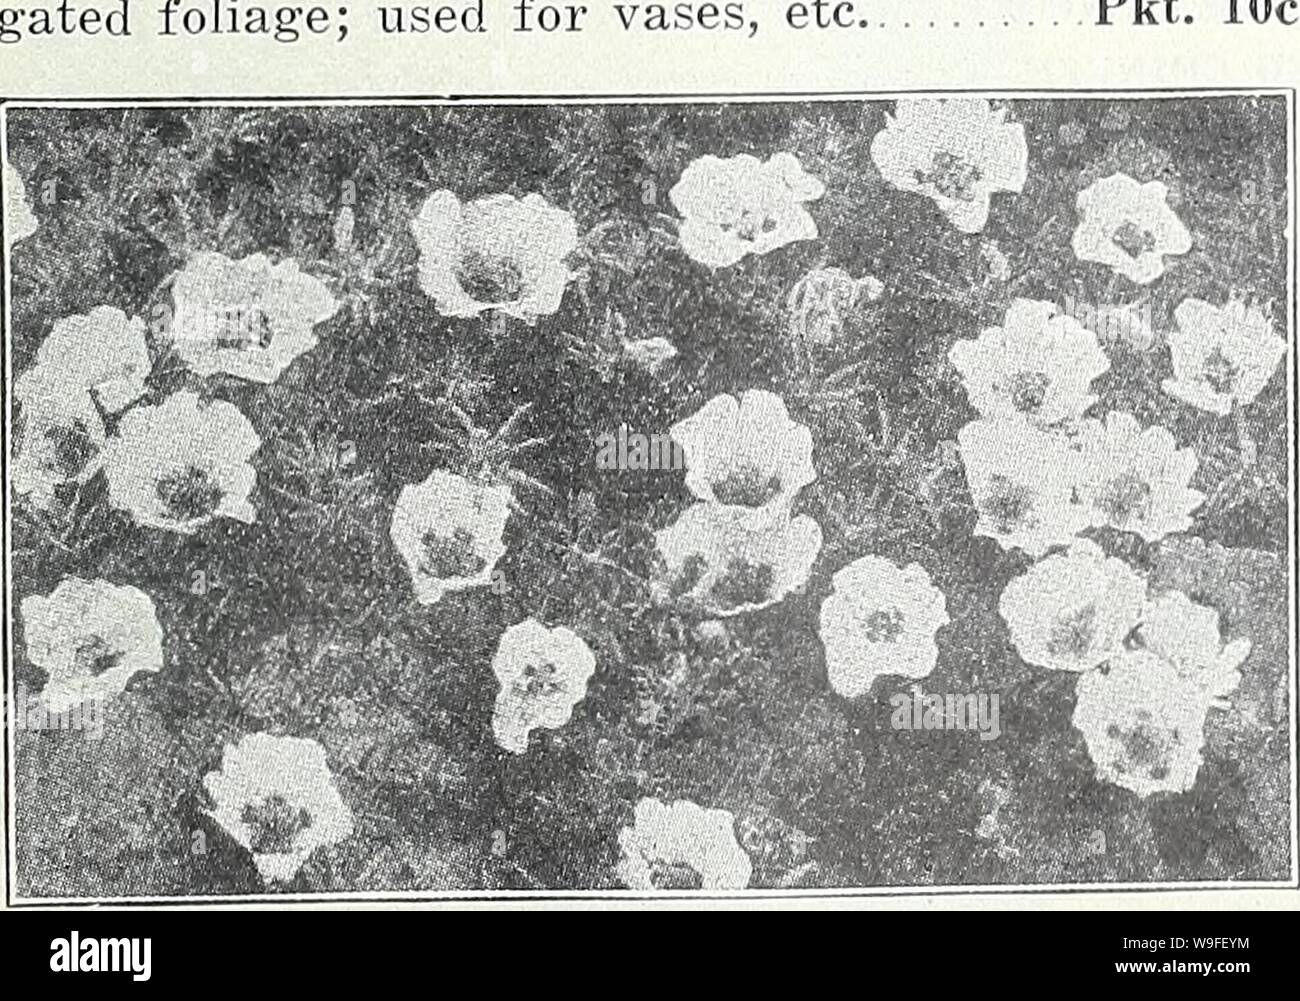 Archive image from page 36 of Currie's garden annual  spring. Currie's garden annual : spring 1934 59th year  curriesgardenann19curr 0 Year: 1934 ( PASSIFLORA (Passion Flower) COERULEA—A rapid-growing vine for the con- servatory or window. The flowers are a beautiful sky-blue, and are produced freely on a rich back- ground of handsome green foliage Pkt. 10c PENNISETUM (Fountain Grass) Ornamental grasses with beautiful, feathery plumes, useful for edging beds of Cannas and other tall-growing plants. LONGISTYLUM—Graceful, soft, greenish-white feathery heads Pkt. 10c RUPPELIANUM—Long, purplish, f Stock Photo